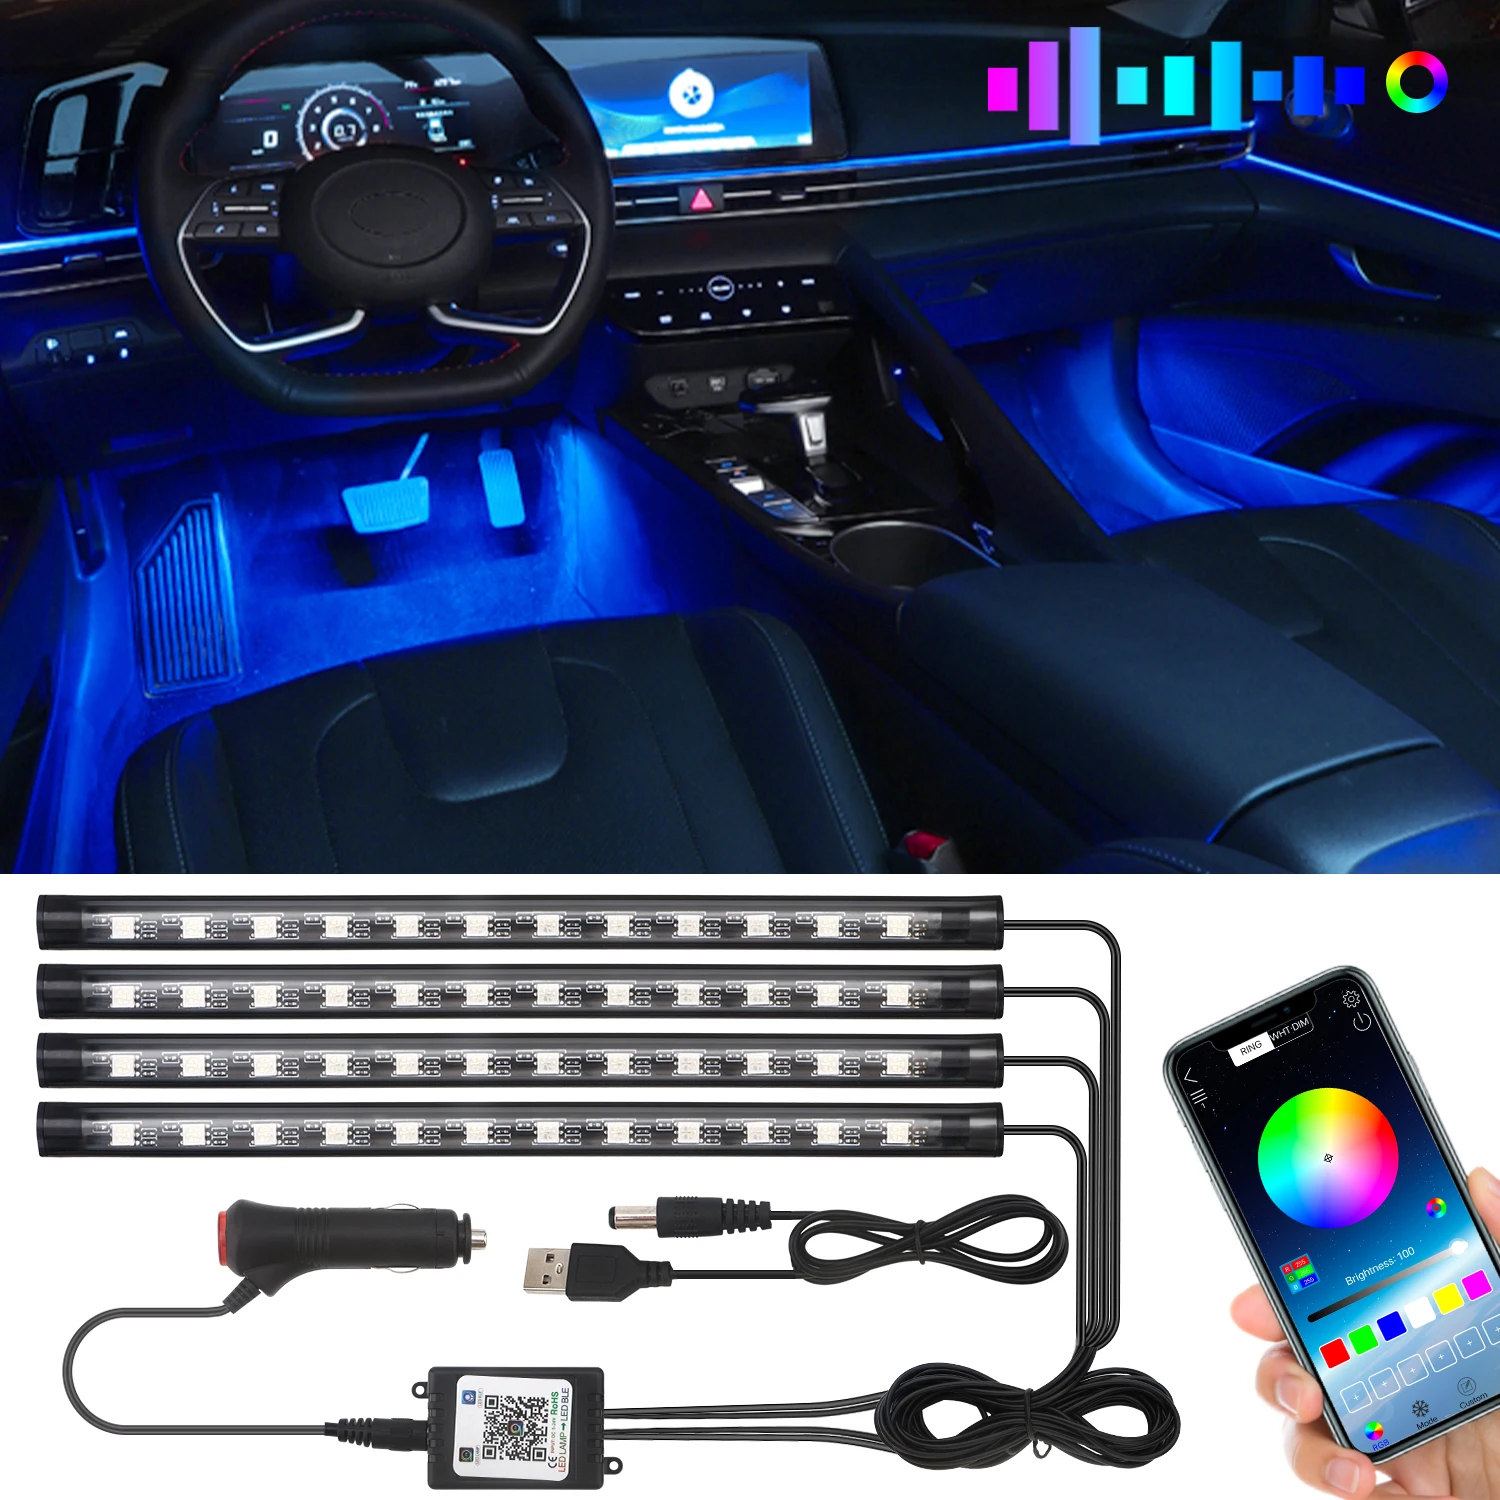 

RGB 5050 Foot Decorative LED Strip Light Atmosphere Car interior ambient Lights With APP Music Wireless Remote Control